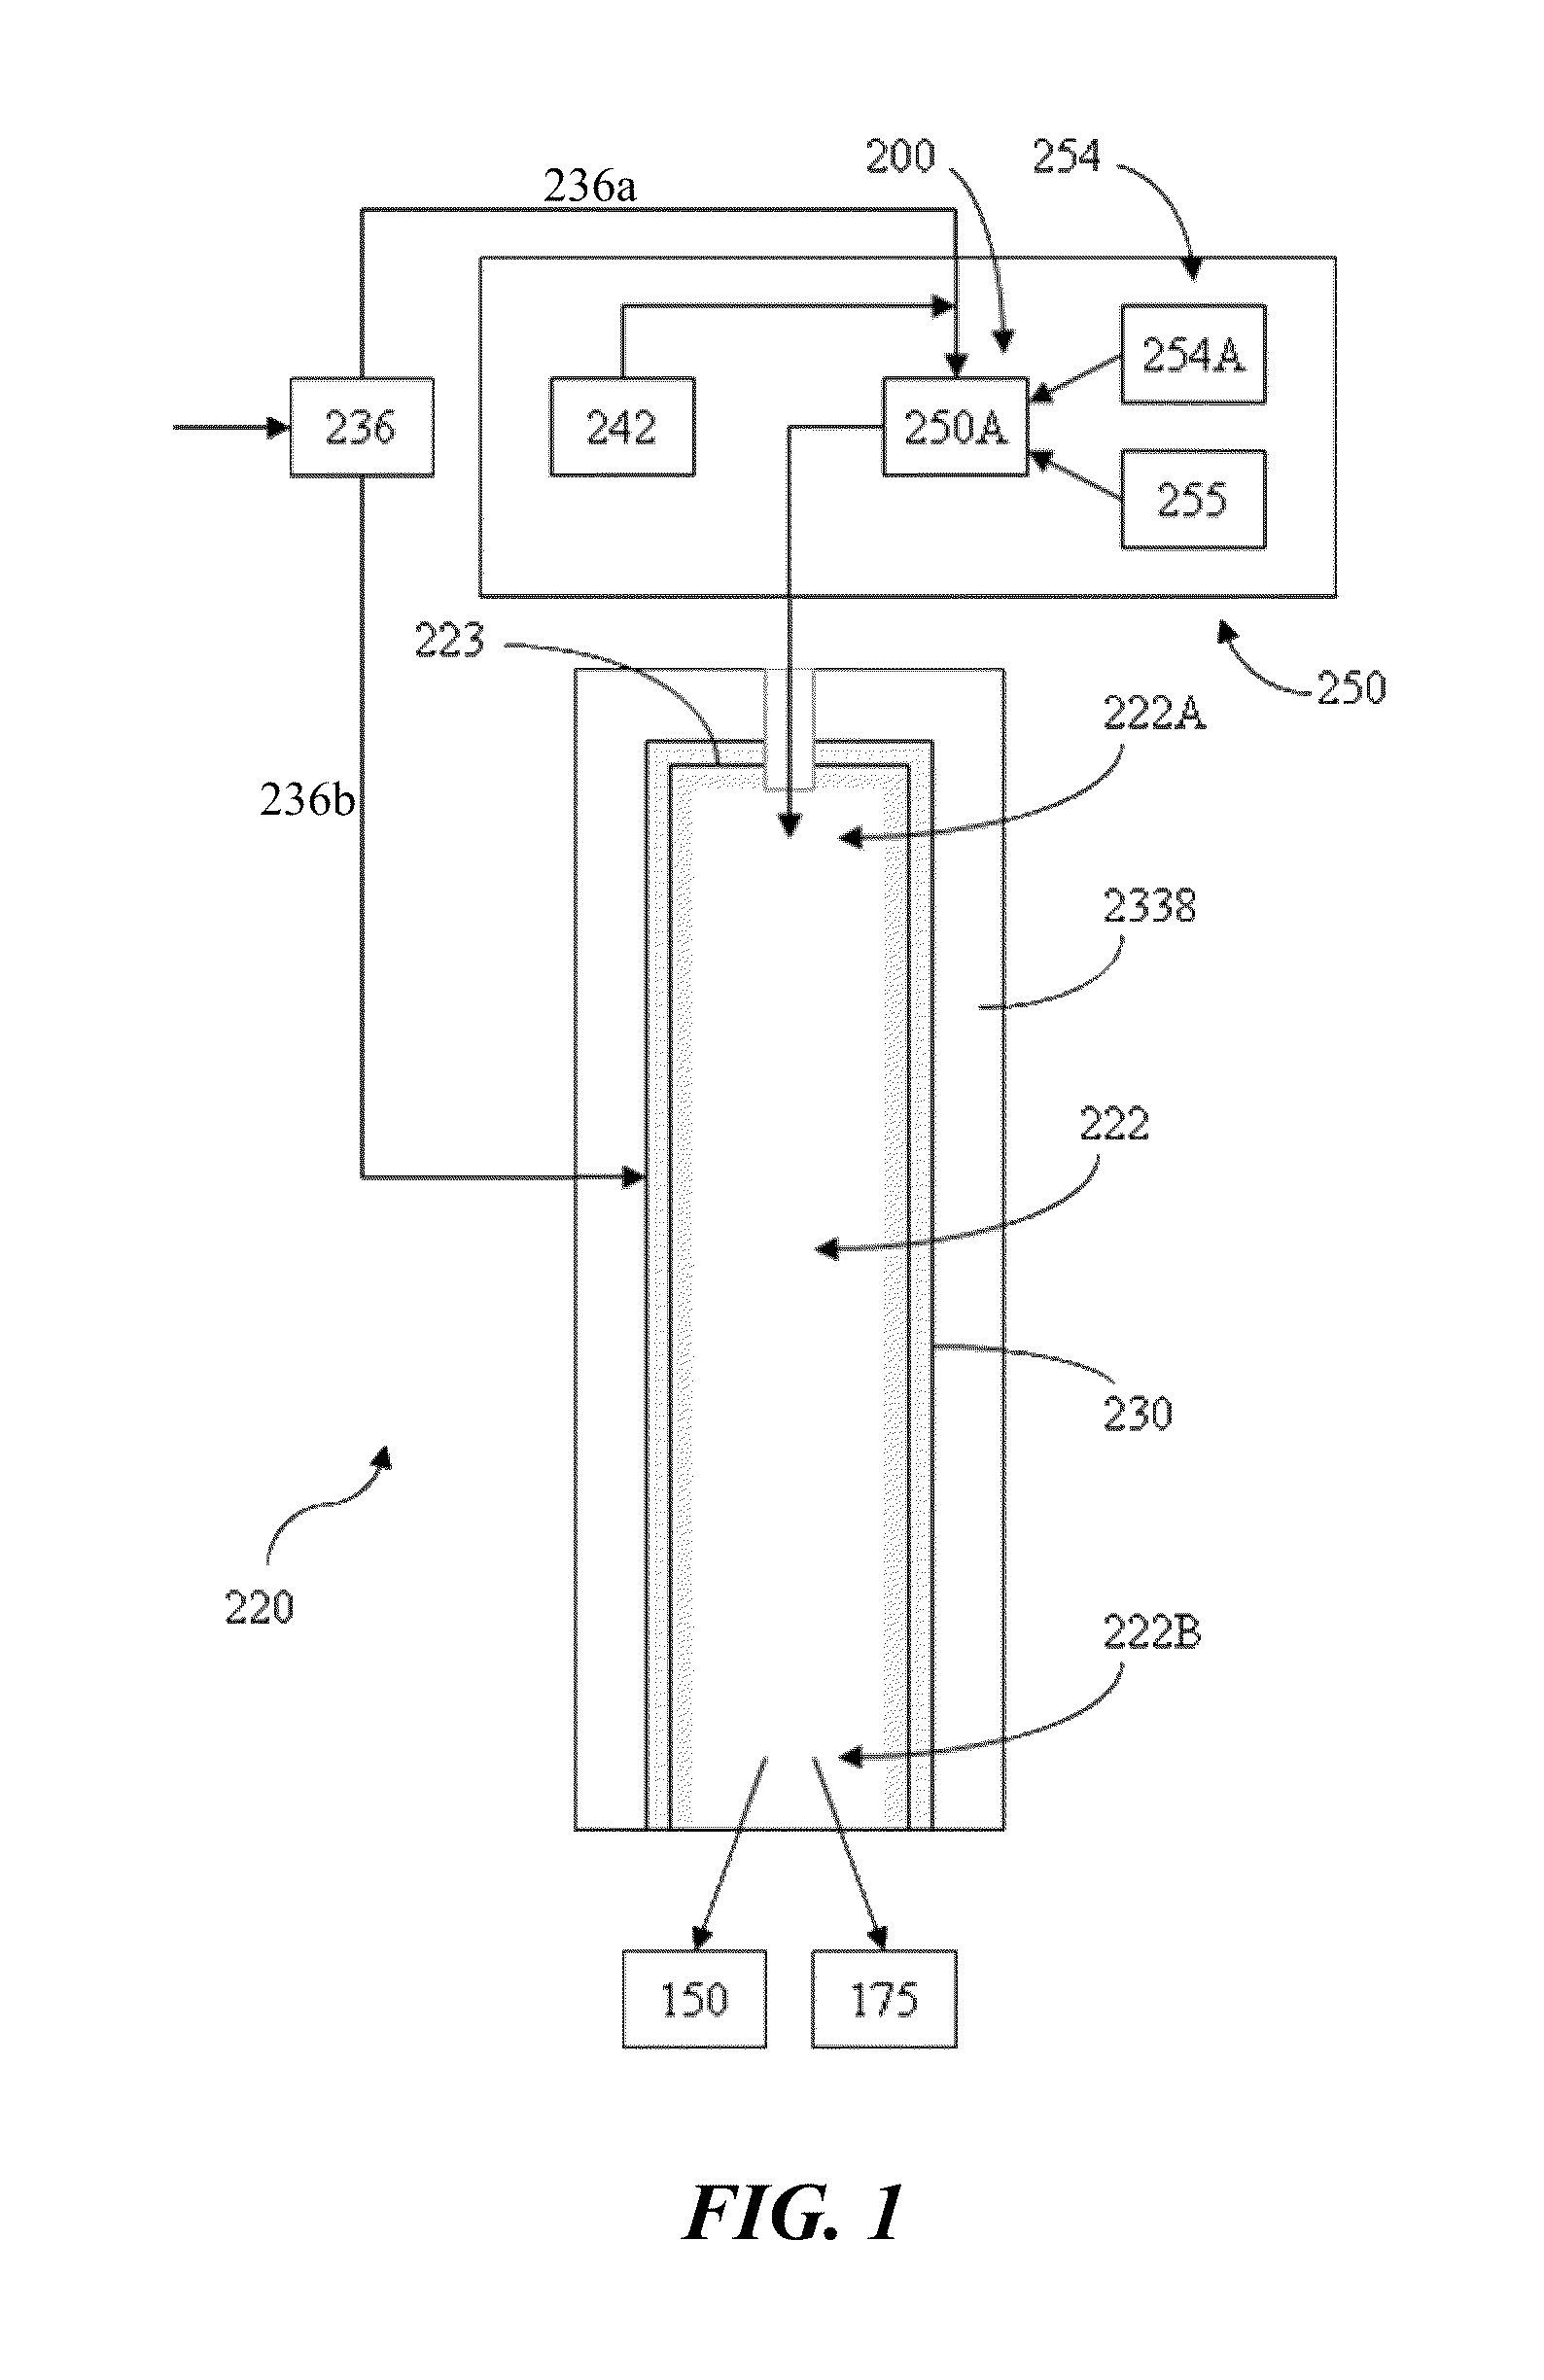 System and method for high efficiency power generation using a carbon dioxide circulating working fluid